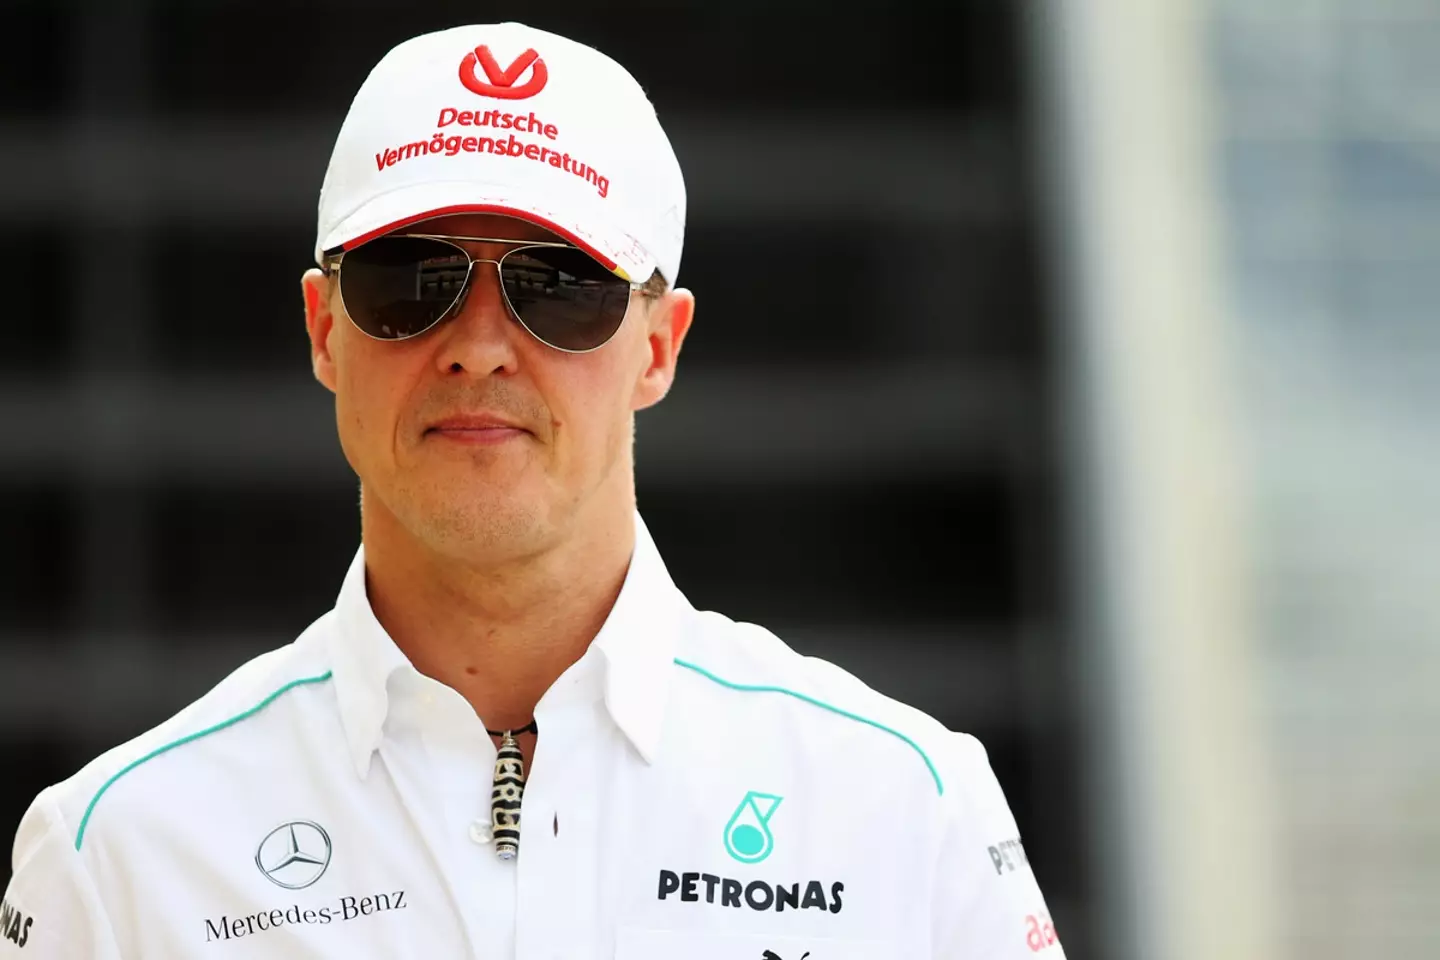 Today (3 January) is Michael Schumacher's 55th birthday.